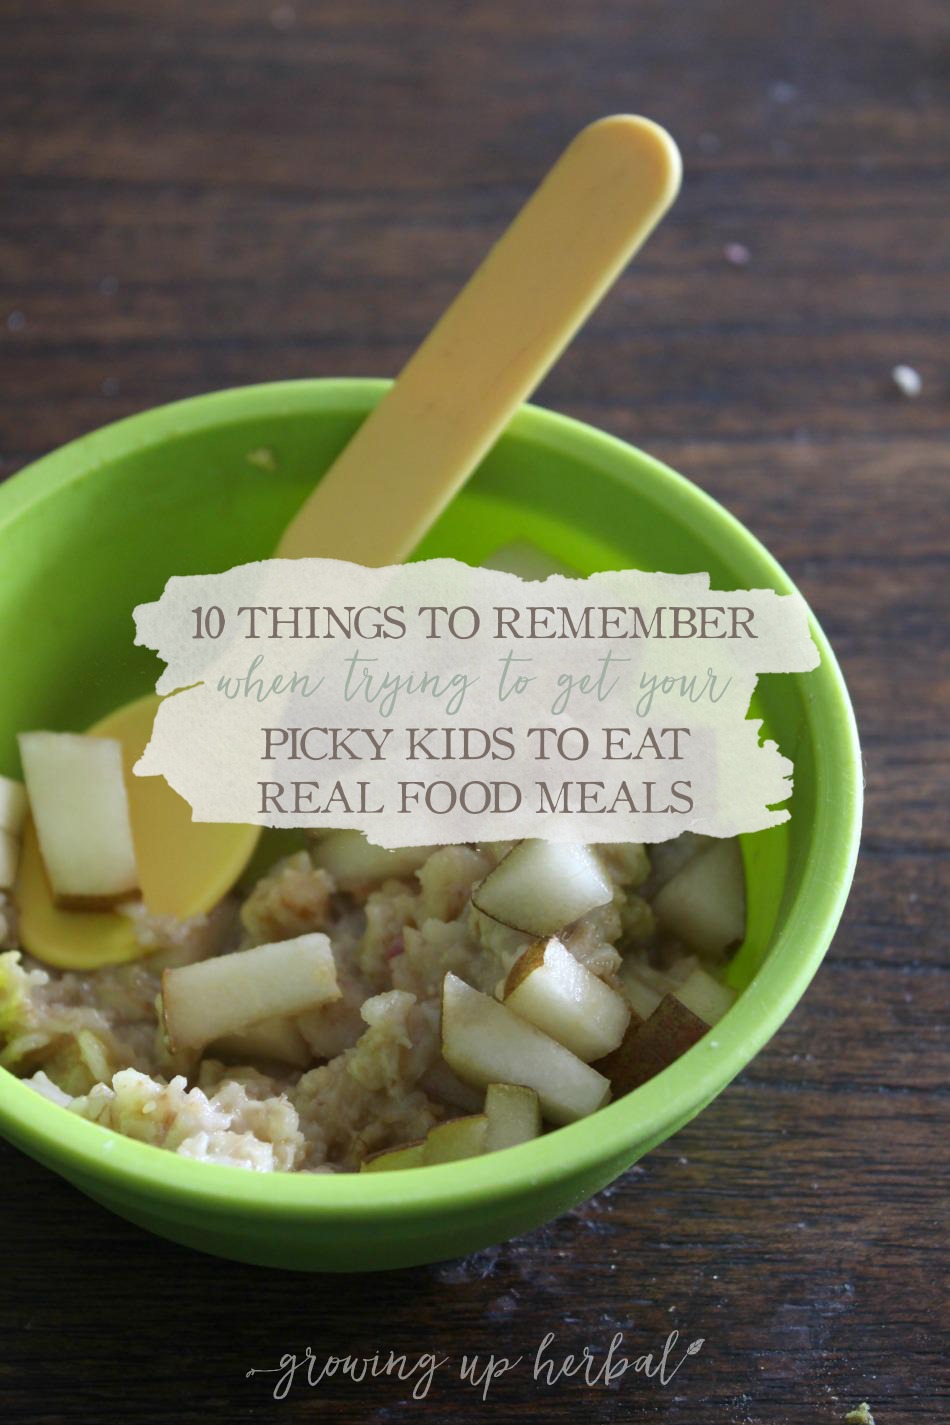 10 Things To Remember When Trying To Get Your Picky Kids To Eat Real Food Meals | Growing Up Herbal | 10 tips for dealing with picky kids over eating healthy foods!